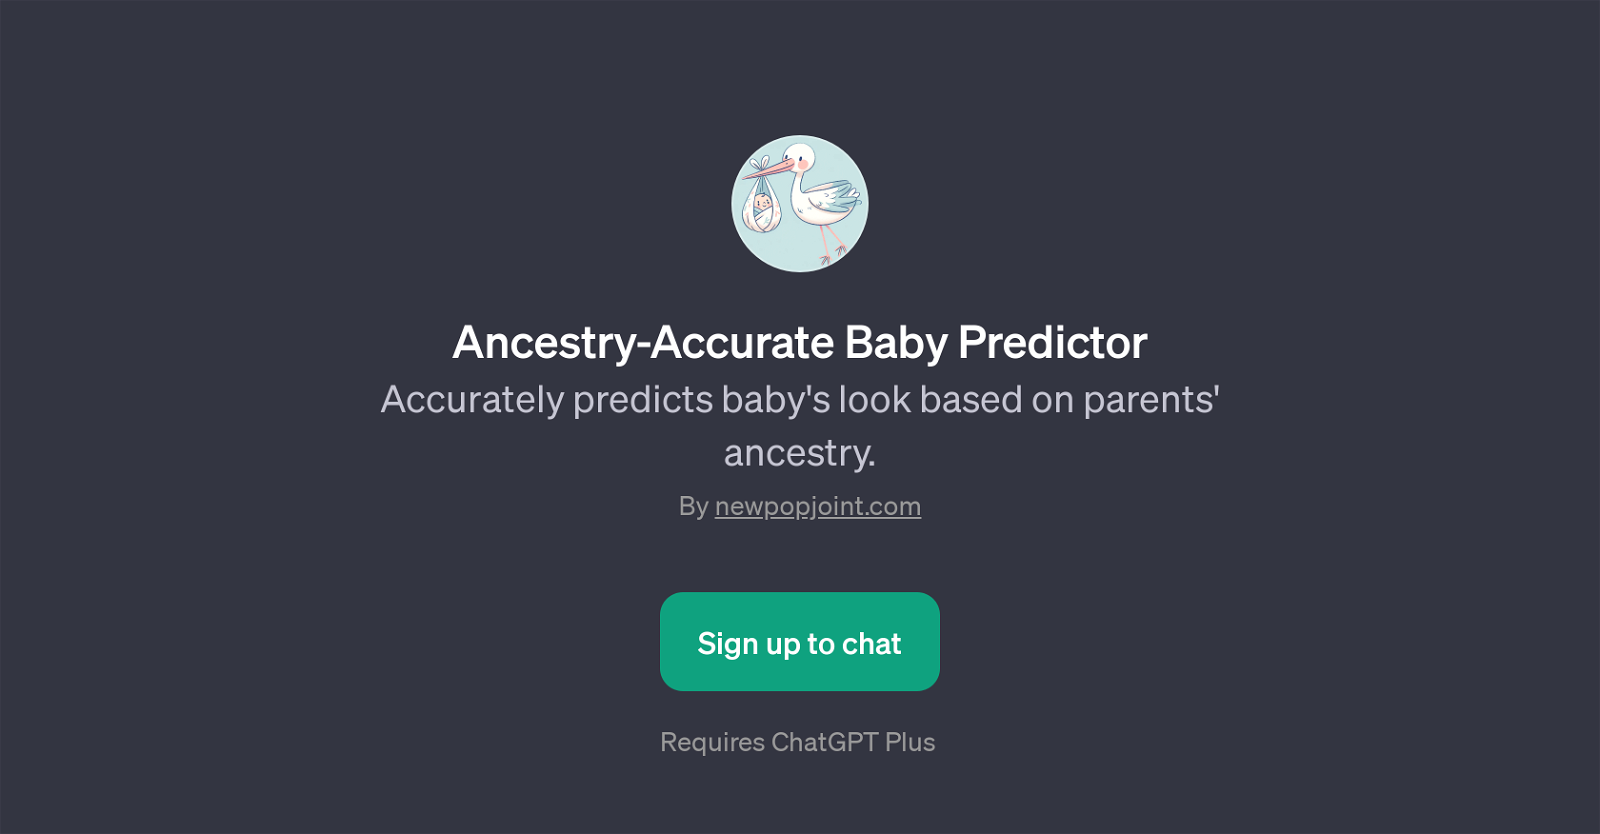 Ancestry-Accurate Baby Predictor website